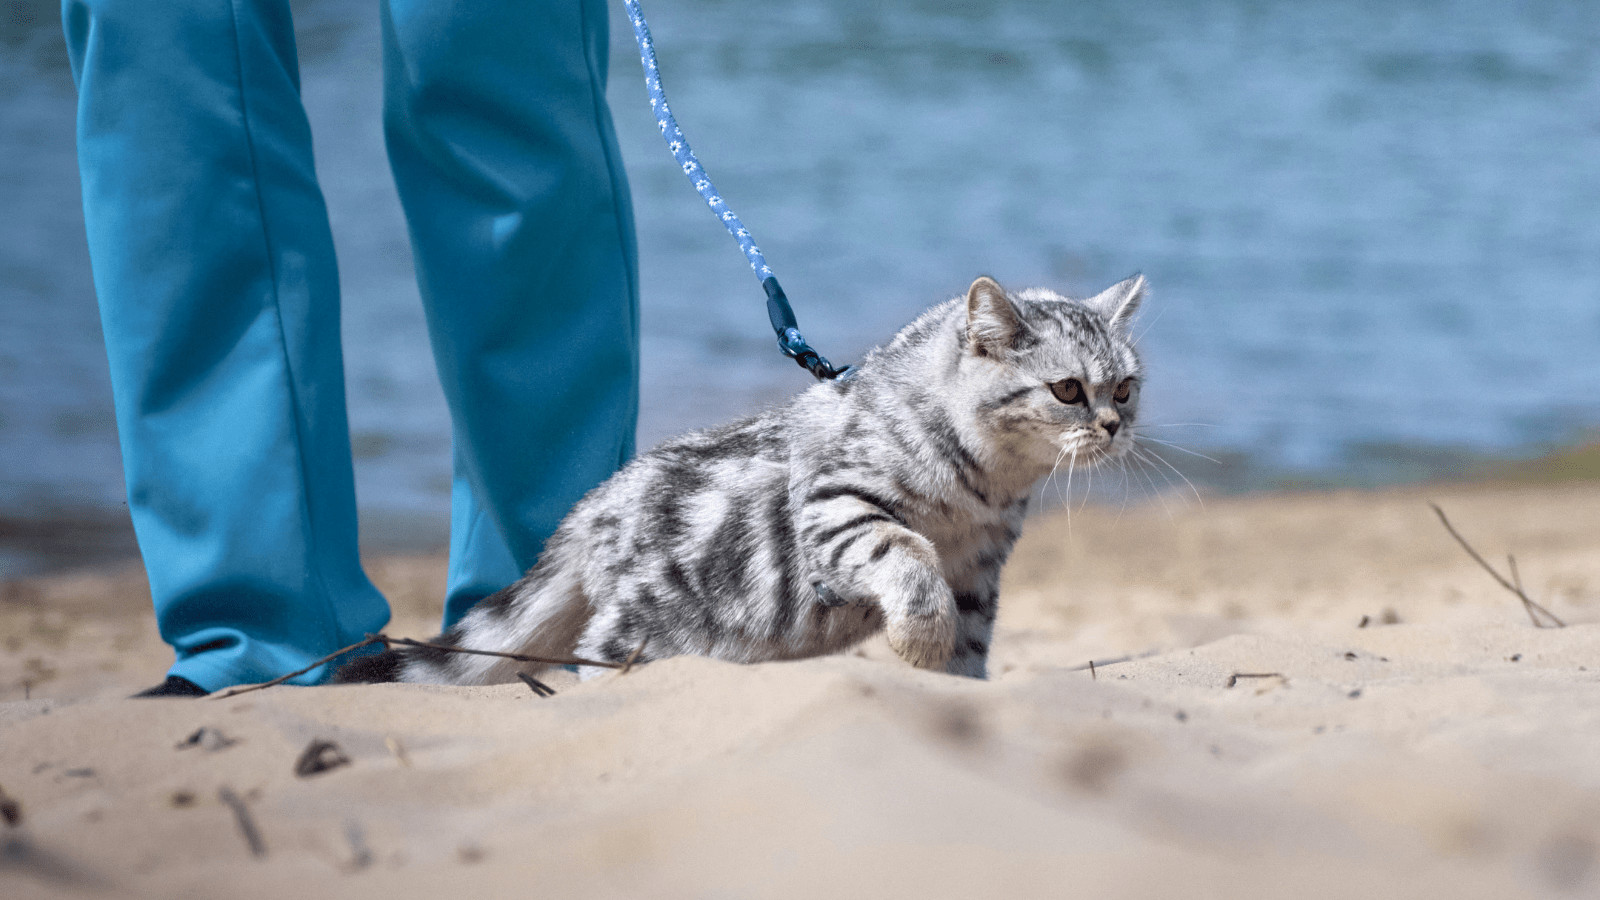 How to leash train your cat for walking